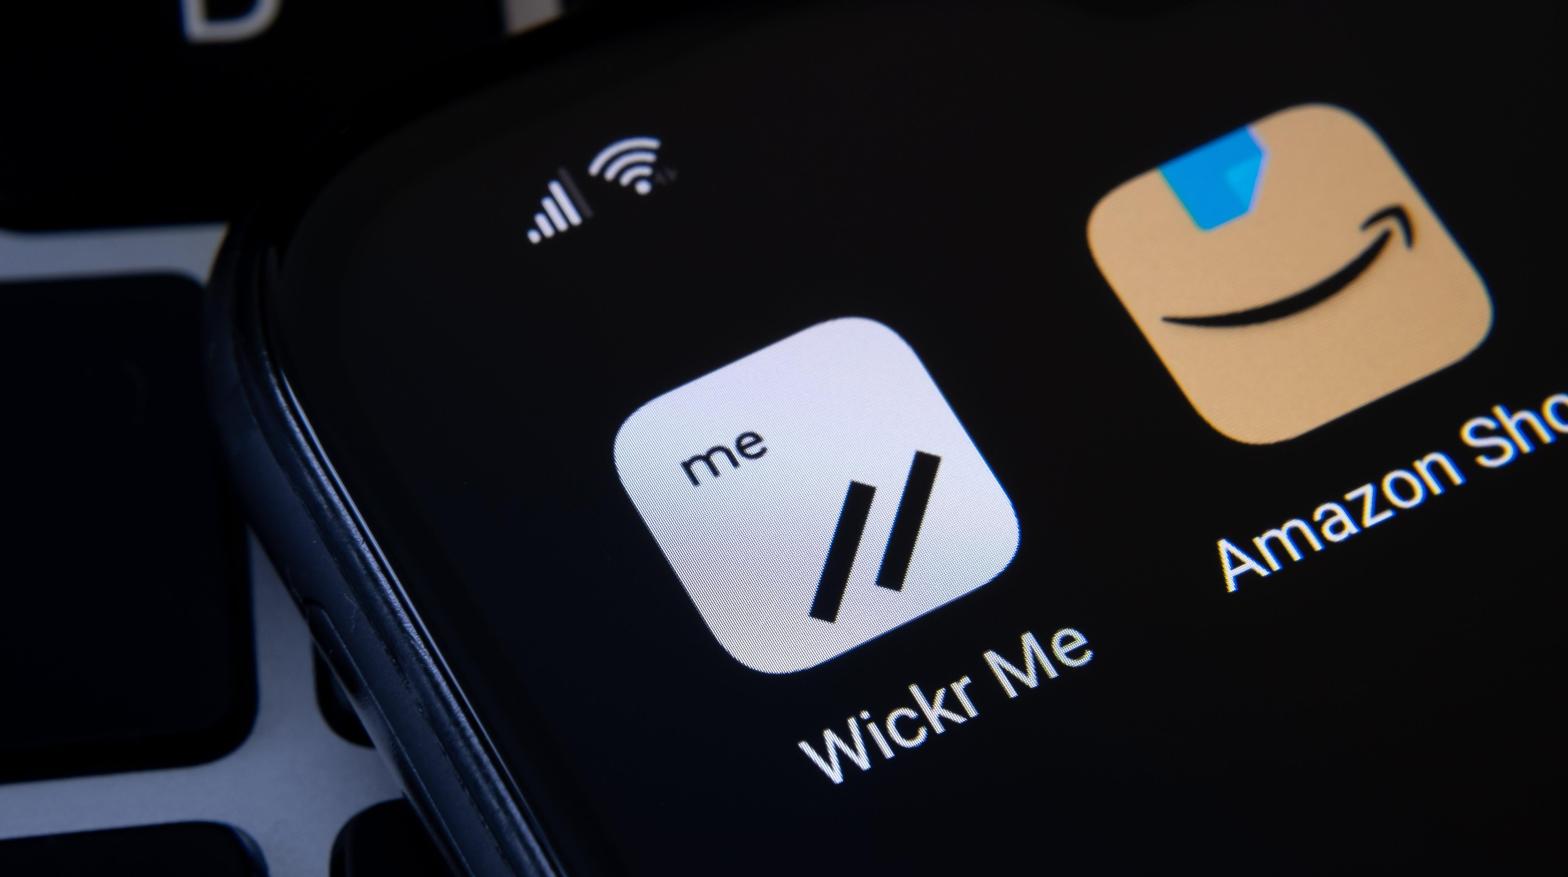 Just a year after buying the company, Amazon announced it was putting an end to the user-centric side end-to-end encryption app Wickr. (Photo: mundissima, Shutterstock)